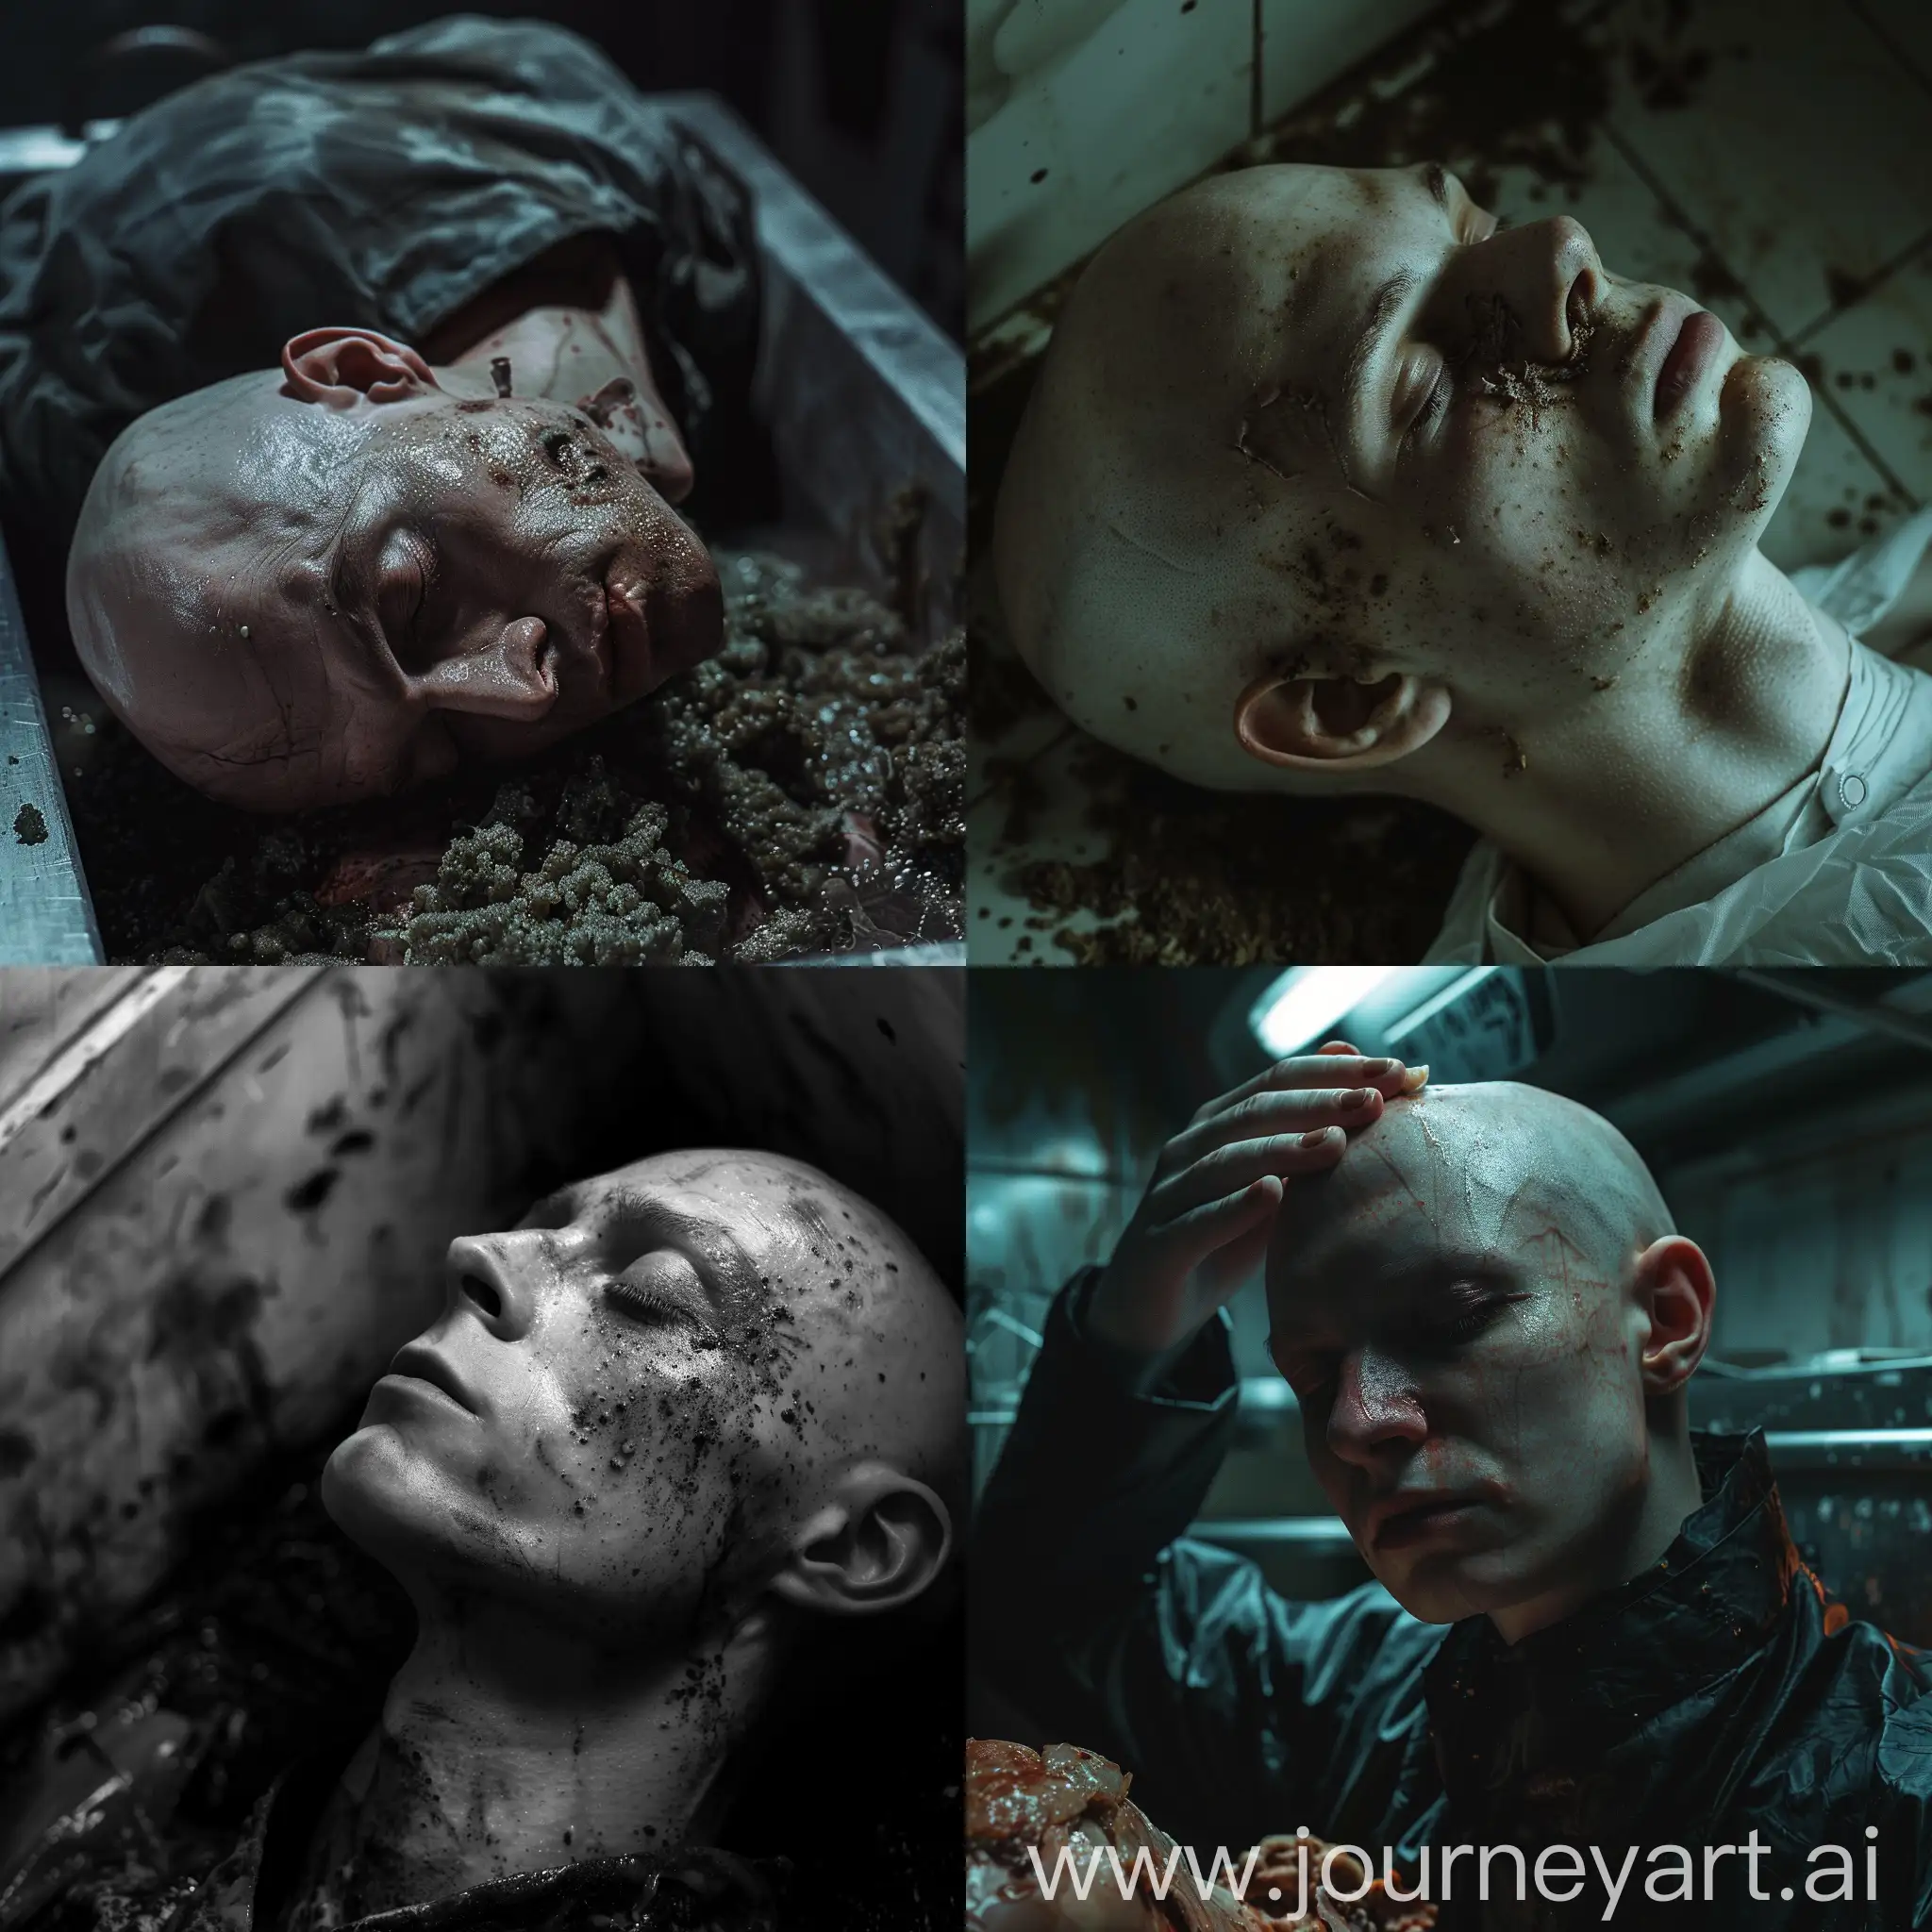 Awake-in-Eerie-Morgue-Bald-Mans-Shocking-Encounter-with-Rotten-Corpse